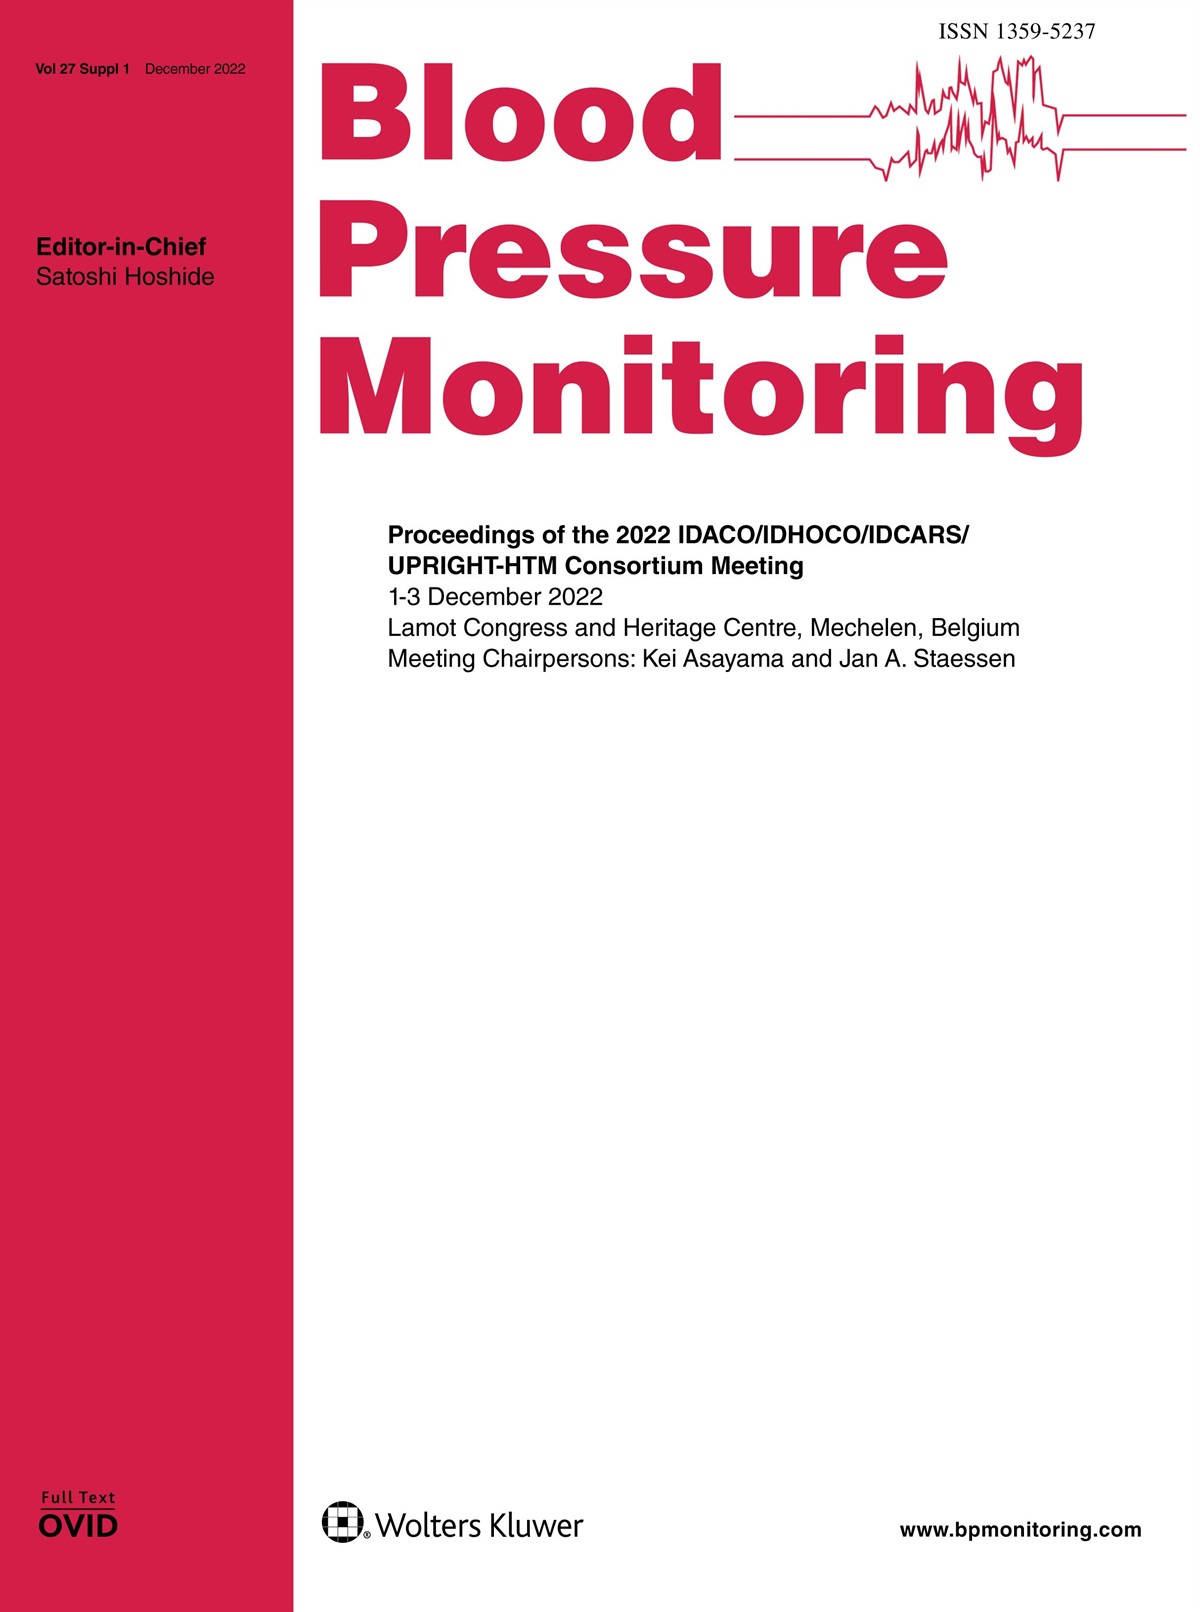 Urinary proteomics combined with home blood pressure telemonitoring for health care reform trial (UPRIGHT-HTM): protocol and status on 6 October 2022